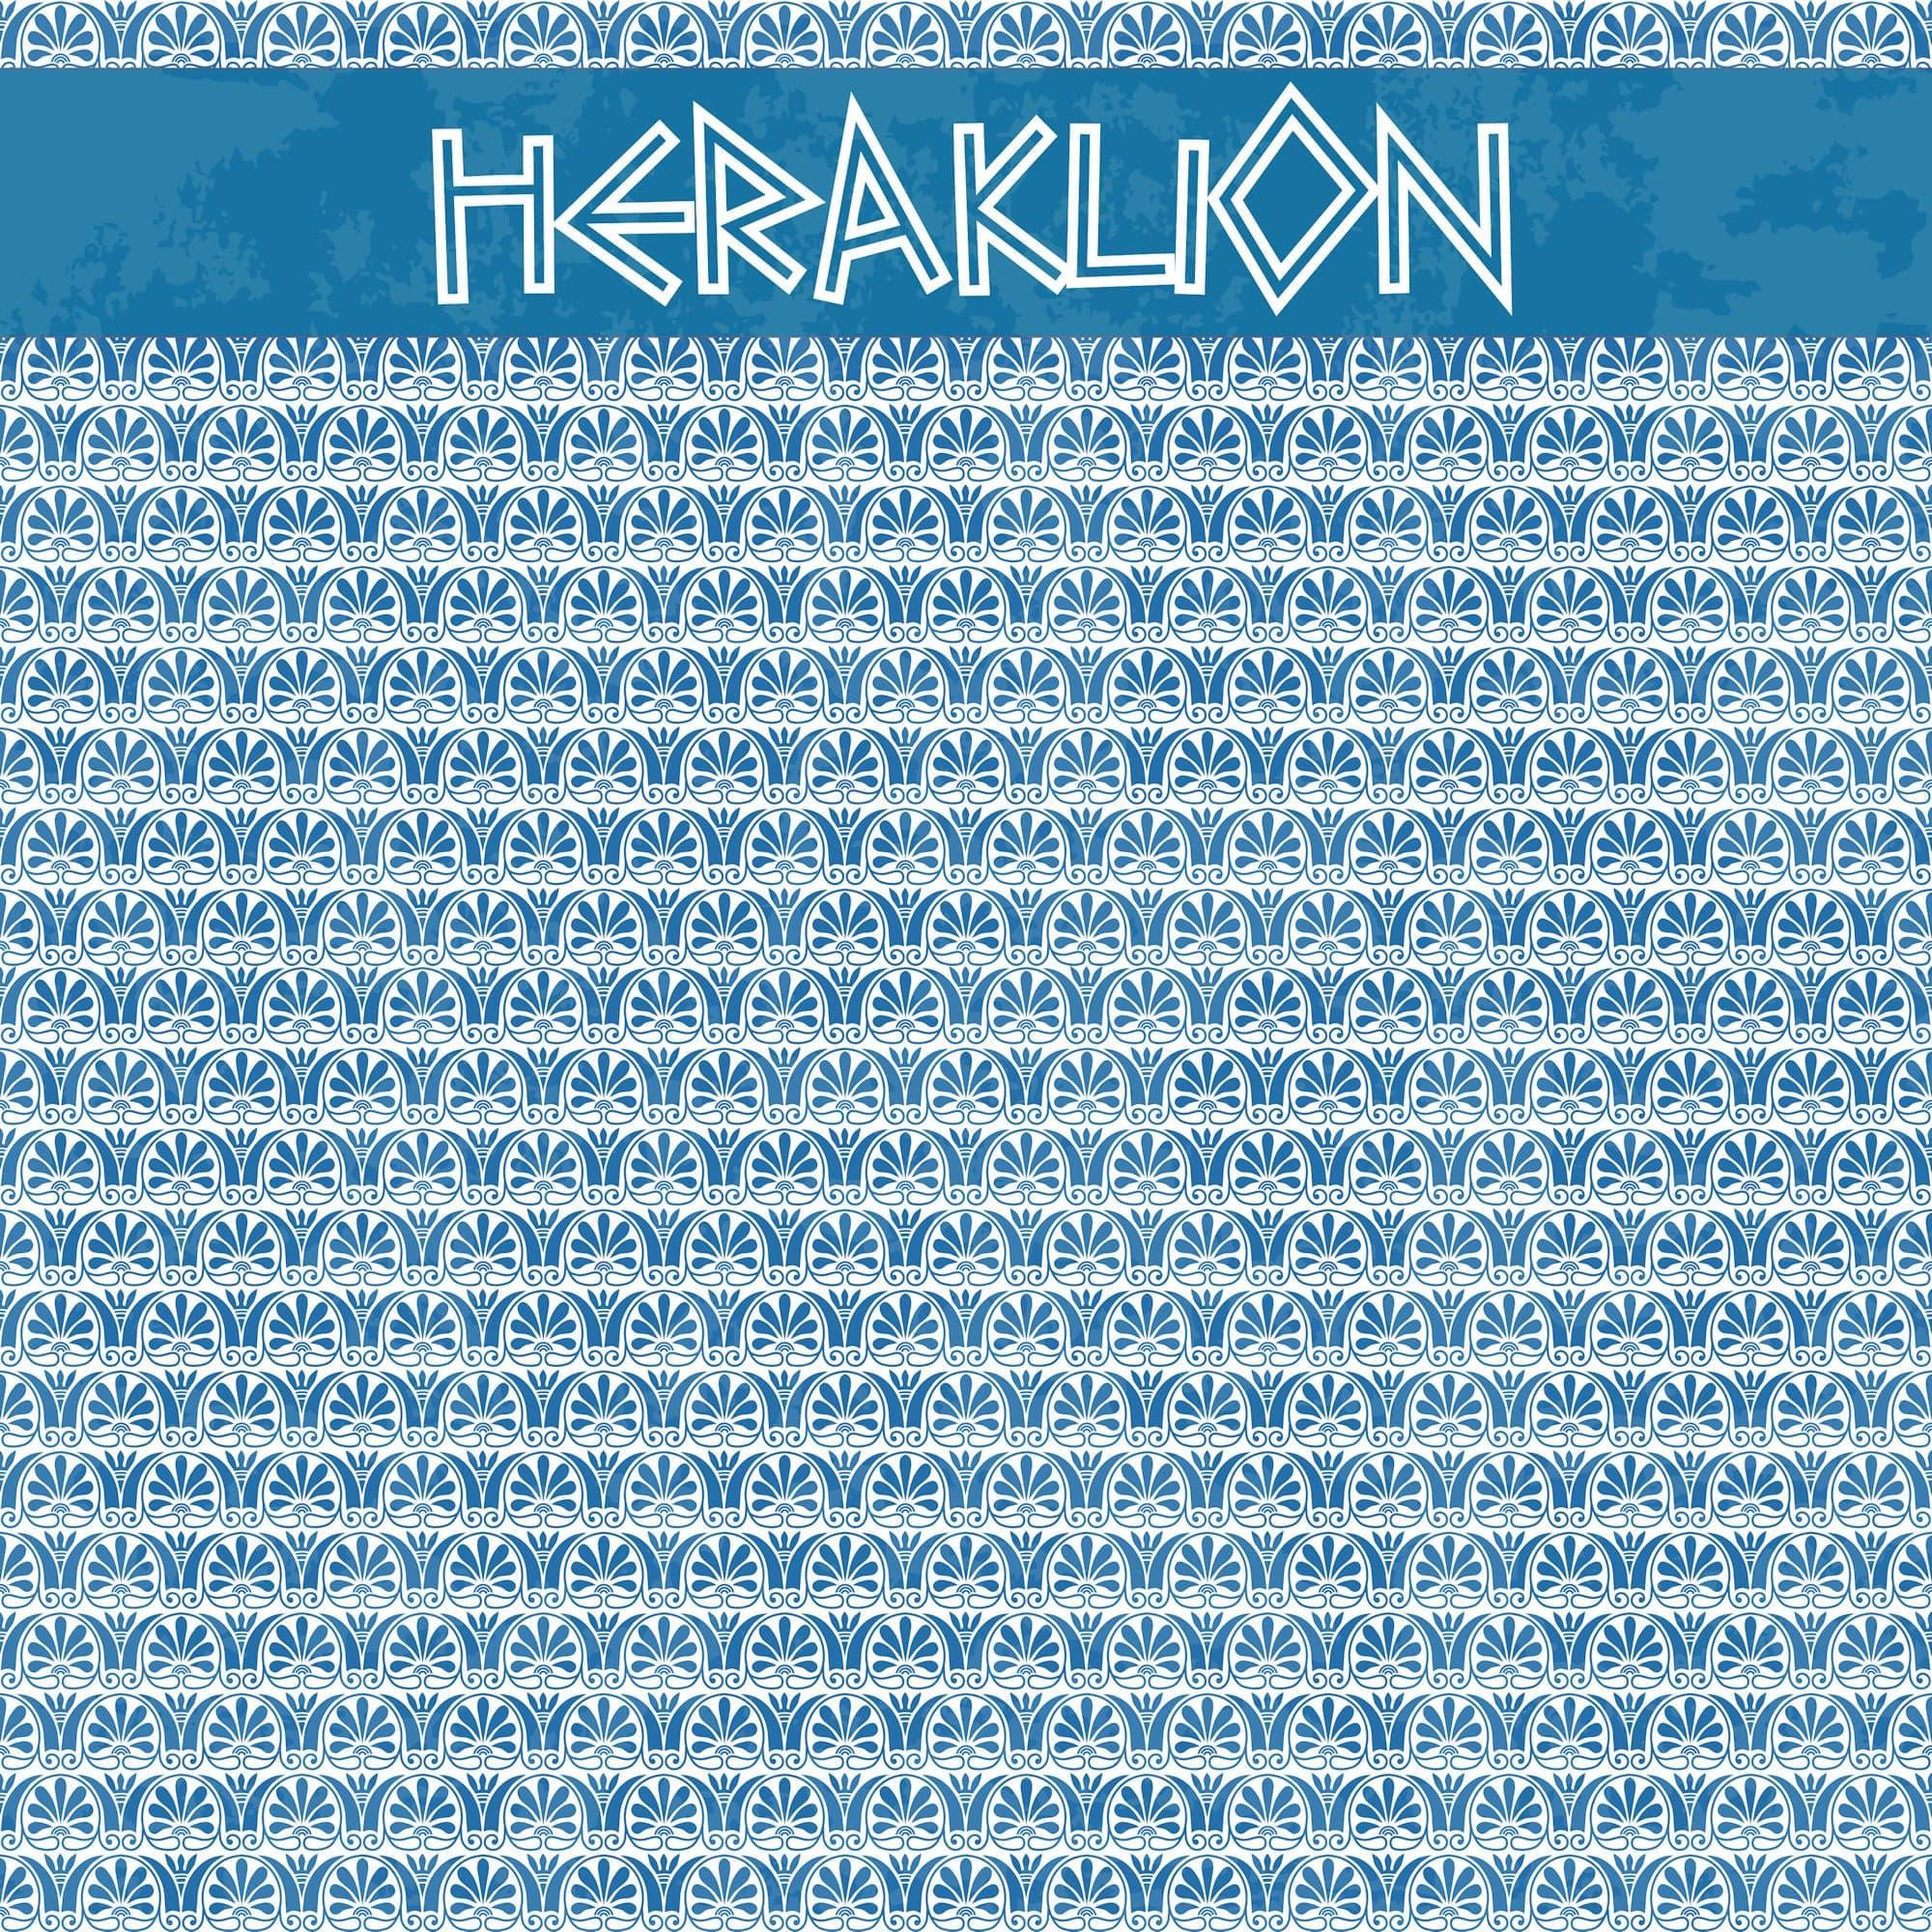 Greece Collection Heraklion 12 x 12 Double-Sided Scrapbook Paper by SSC Designs - Scrapbook Supply Companies